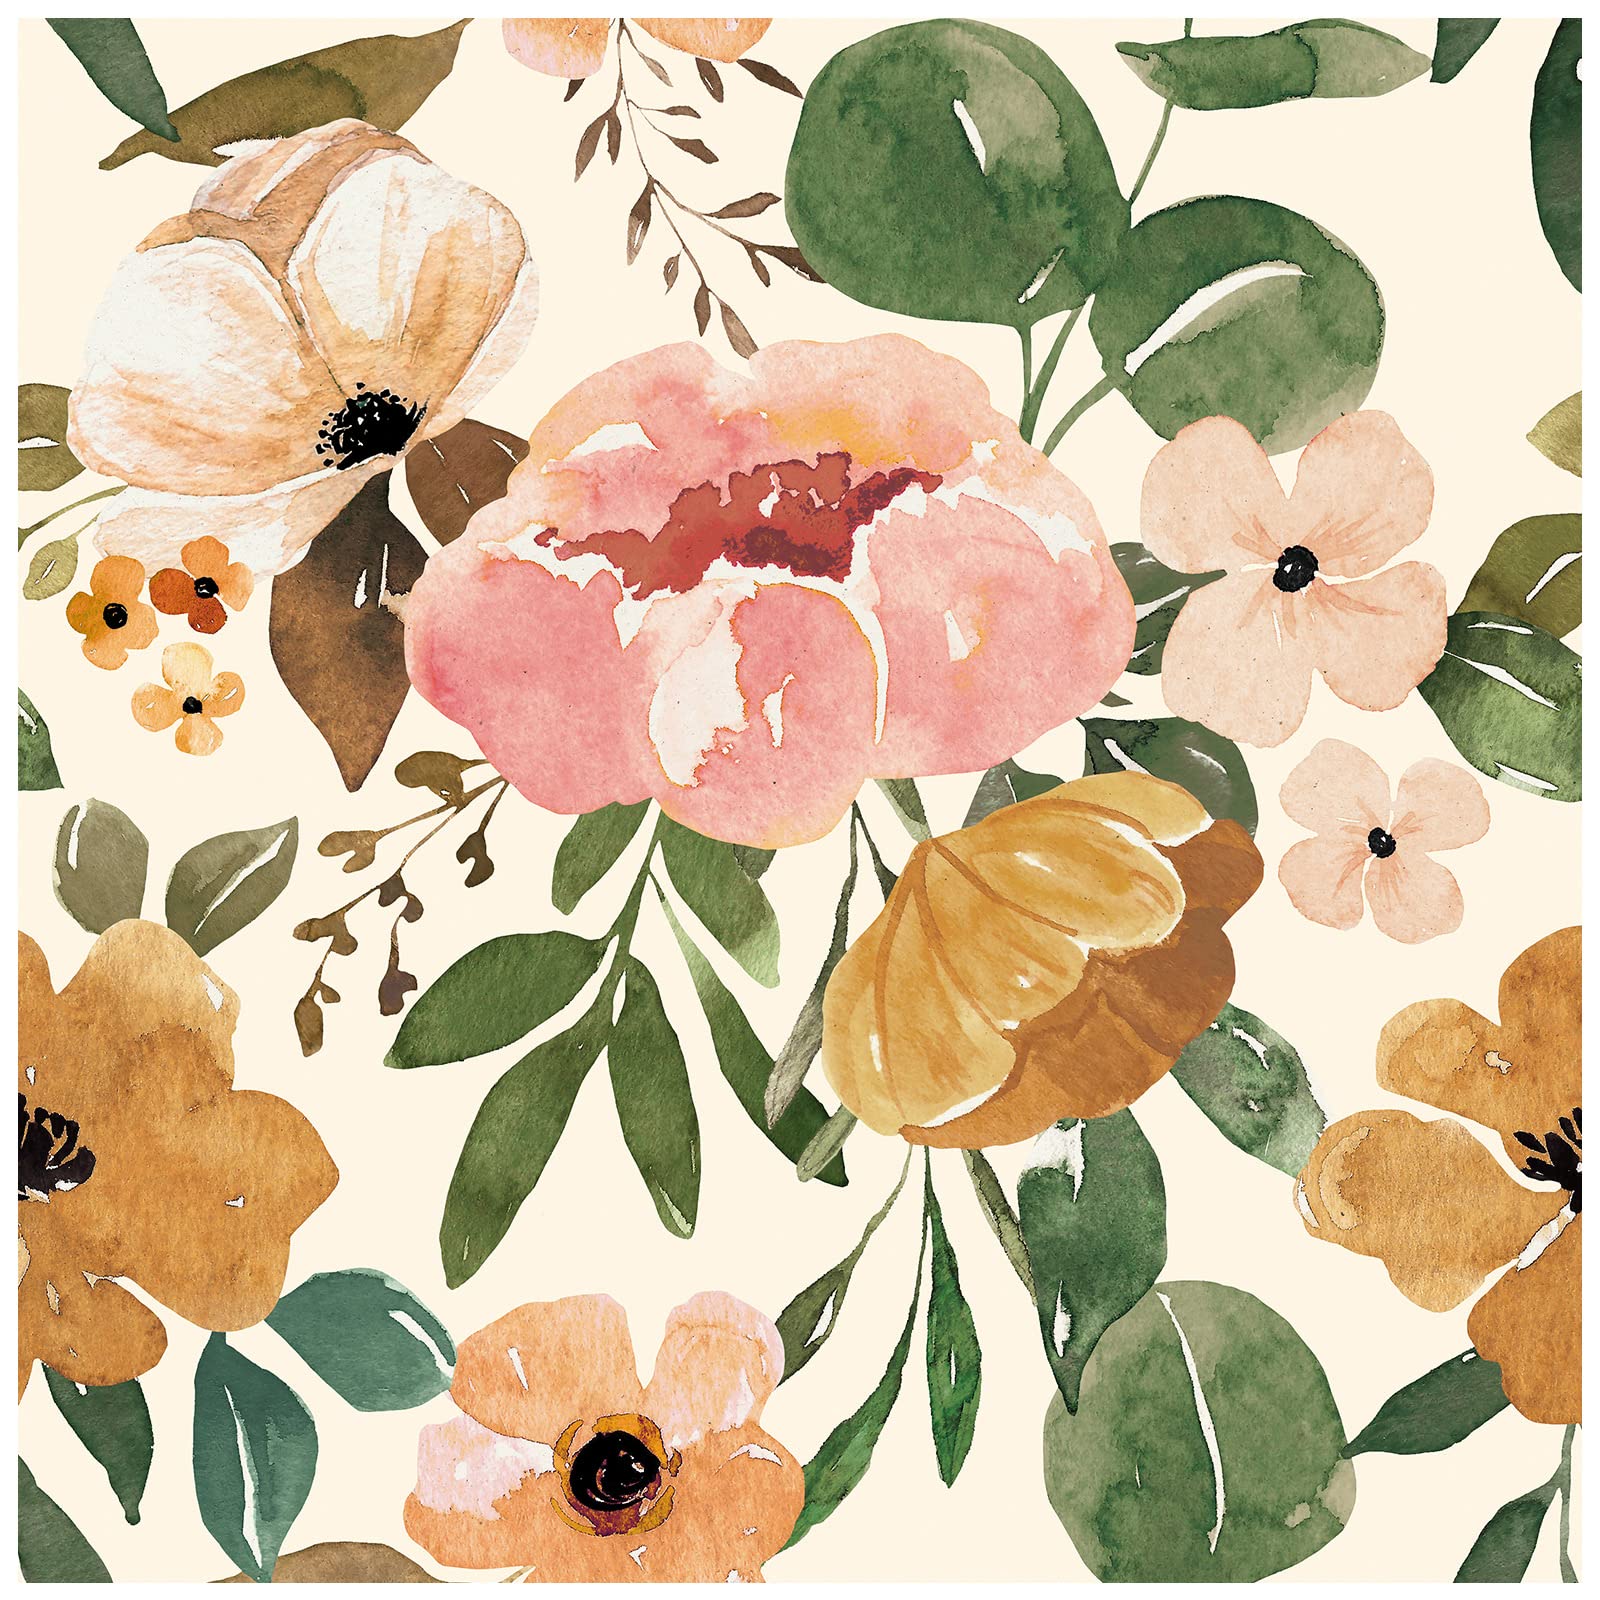 HAOKHOME 93215 2 Vintage Boho Floral Peel And Stick Wallpaper Peonies Removable Rose Beige Pink Oliva Vinyl Self Adhesive Mural 17.7in X 32.8ft